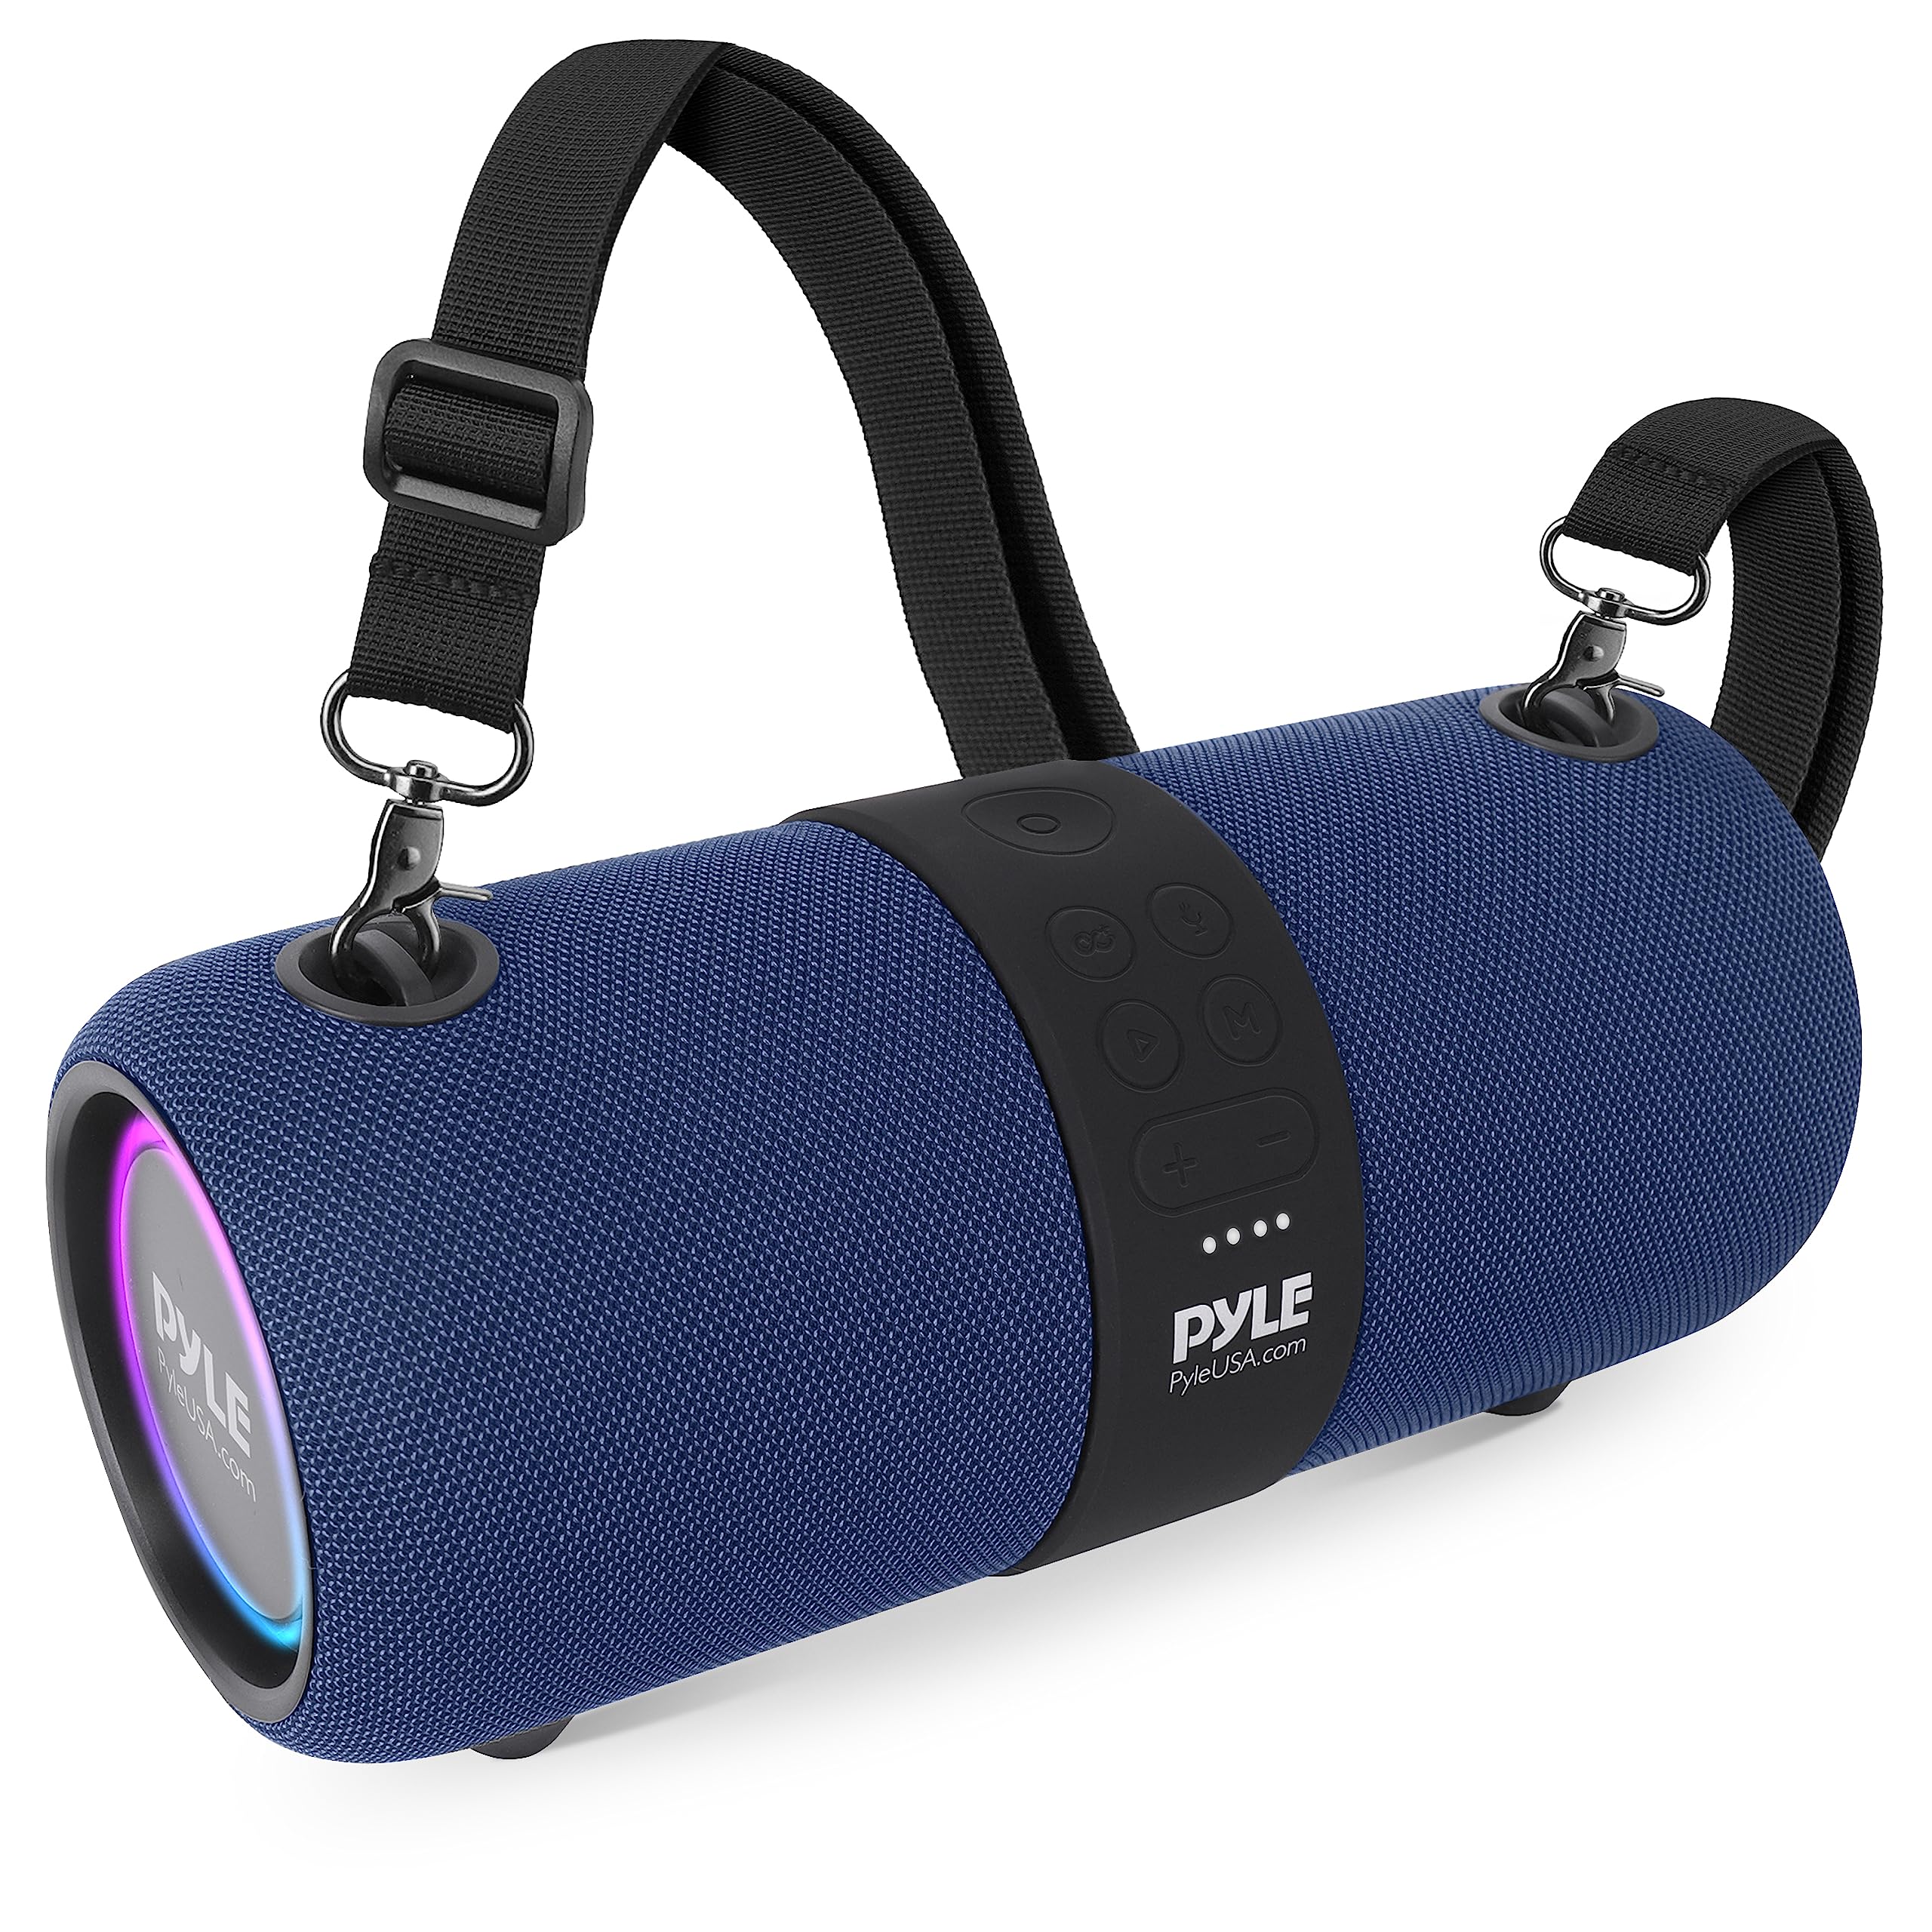 PyleUsa Wireless Portable Bluetooth Boombox Speaker - 2Ch Waterproof Rechargeable Fabric Stereo Speaker w/Google Assistant/Siri Voice Control, TWS Function, USB FM Radio, RGB Lights -PSBWP9BL (Blue)